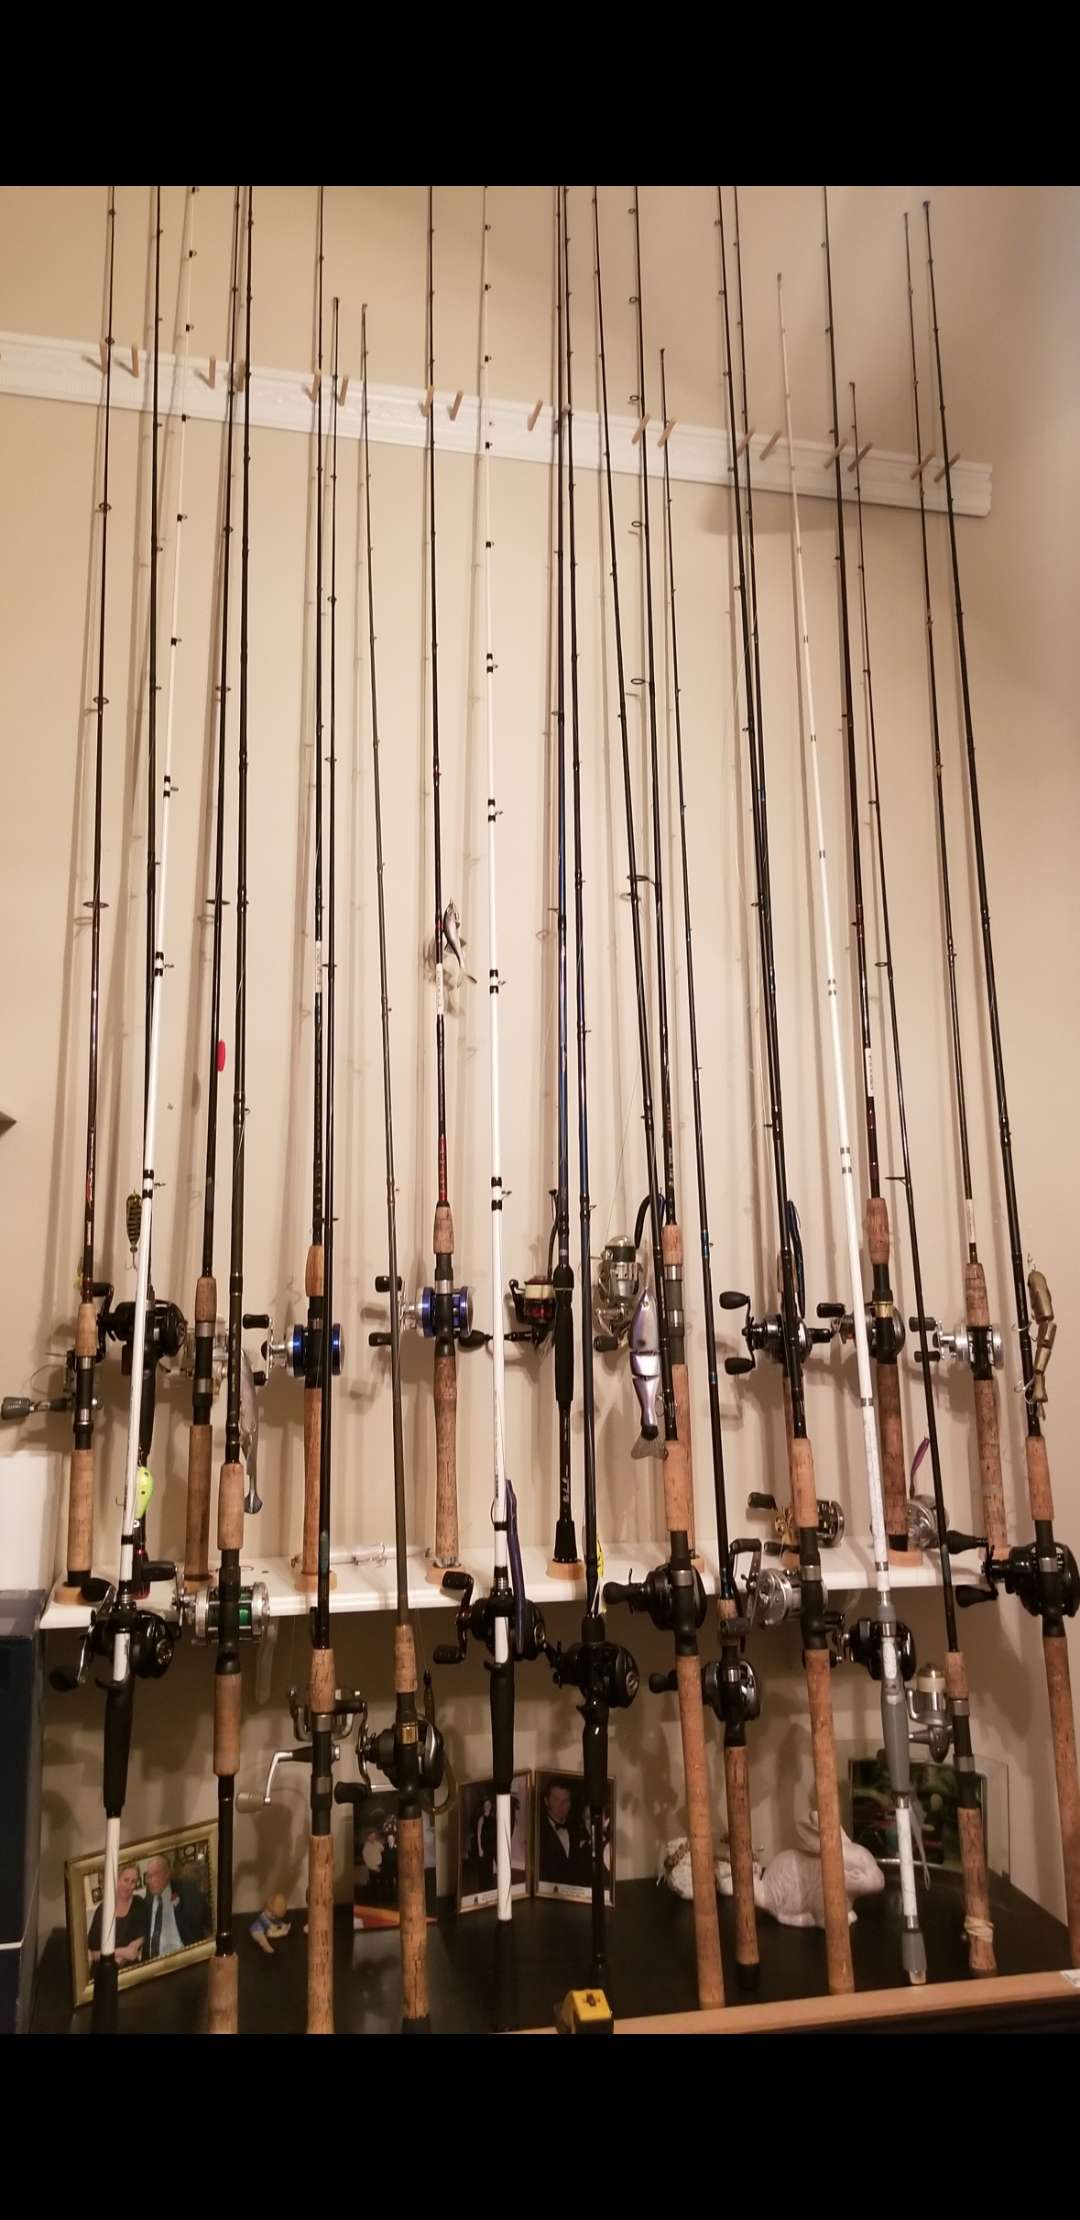 Dedicated Weightless Senko rodwhat do you use? - Fishing Rods